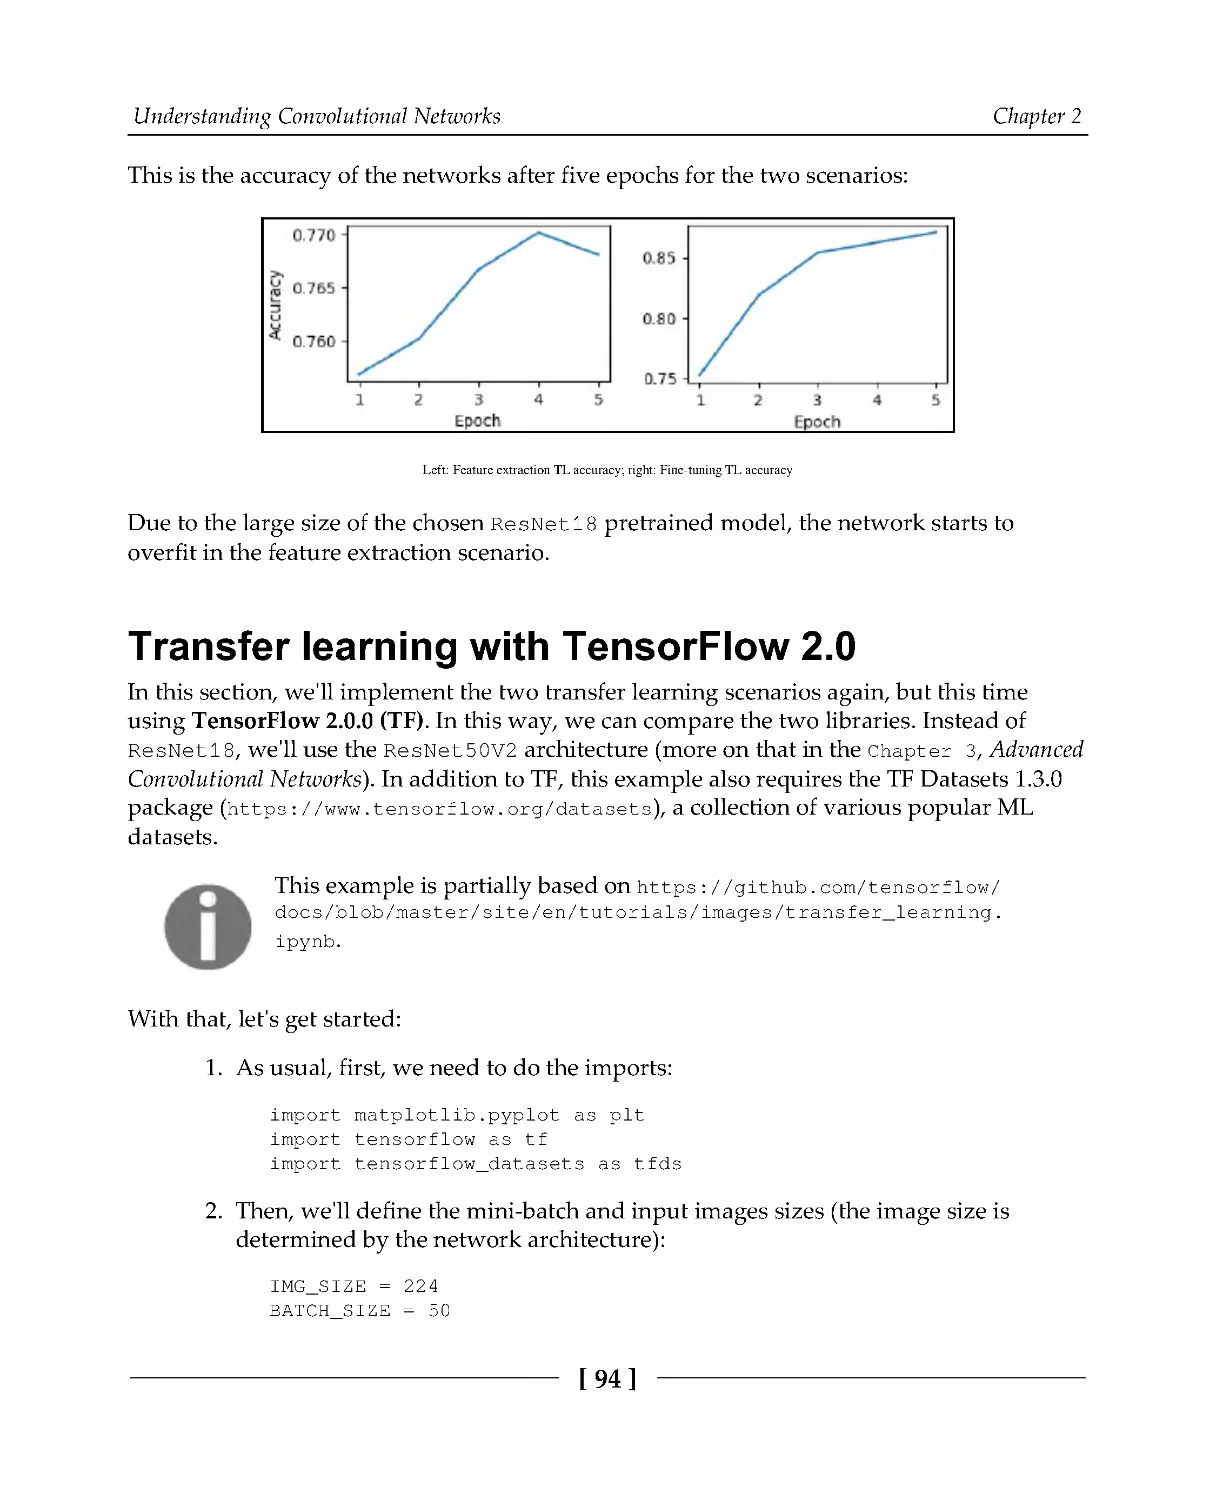 Transfer learning with TensorFlow 2.0